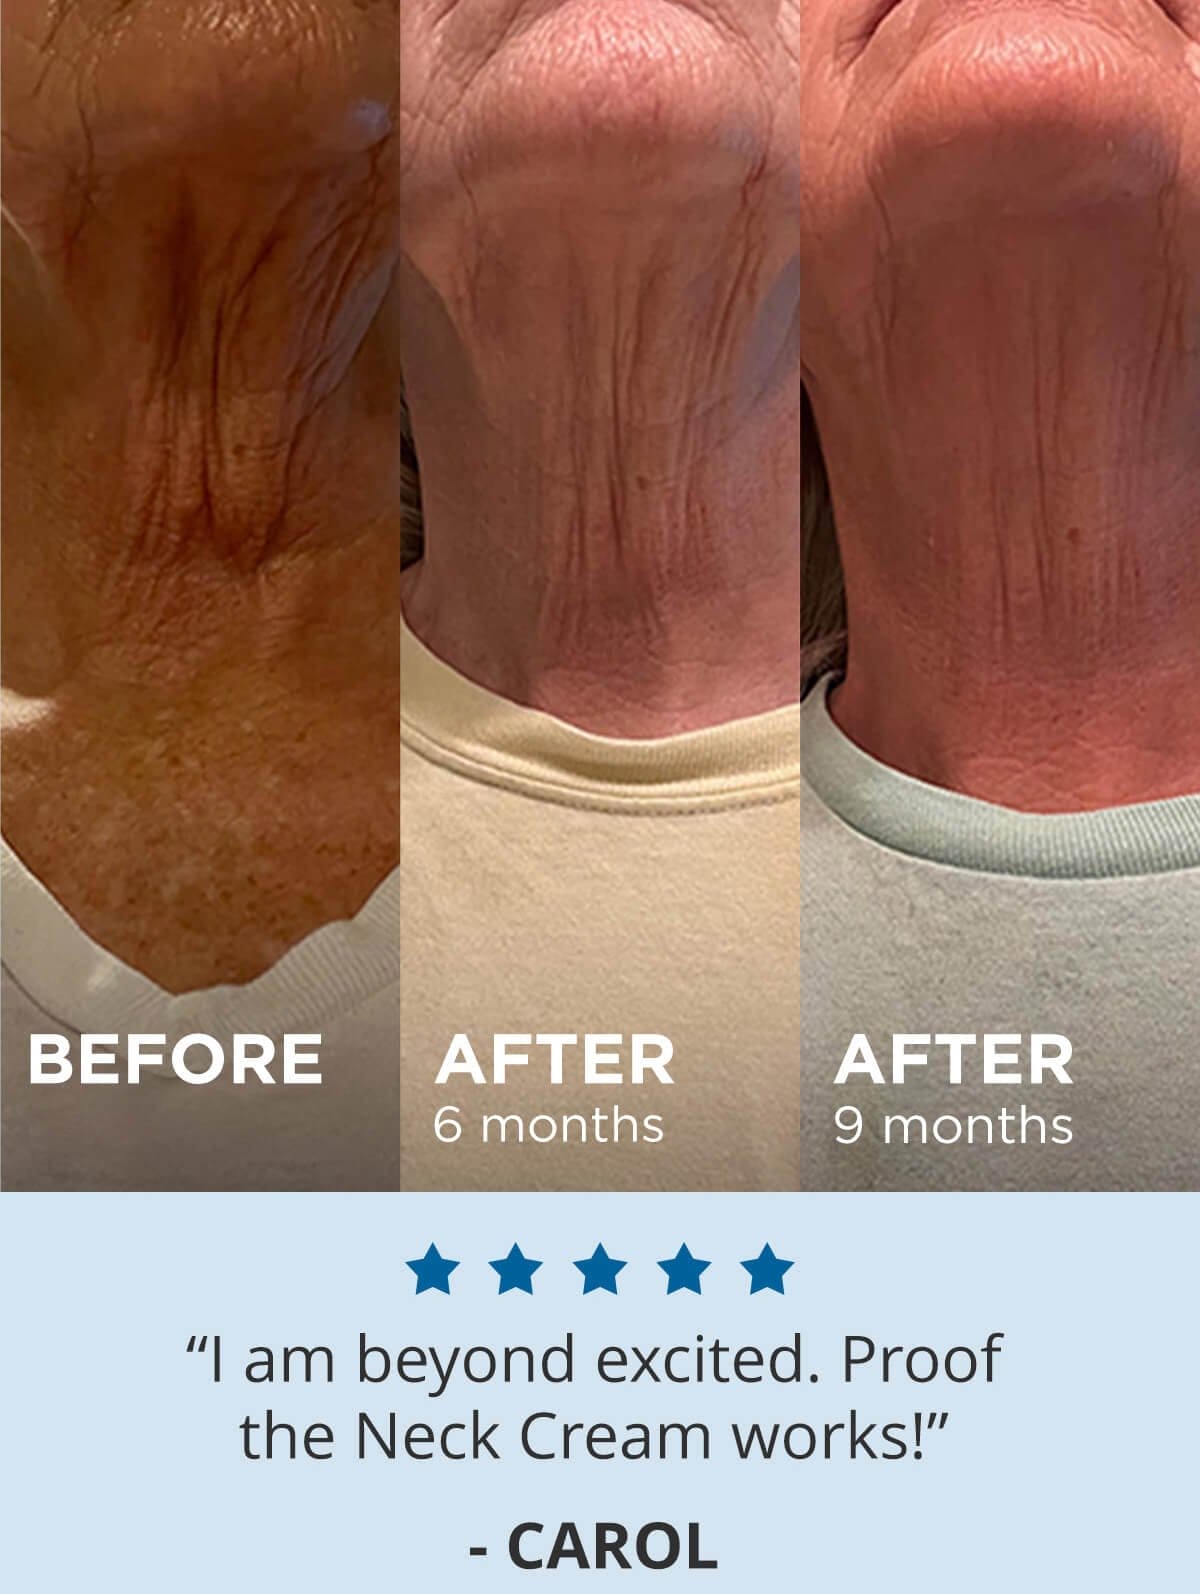 "I am beyond excited. Proof the Neck Cream works!" - Carol